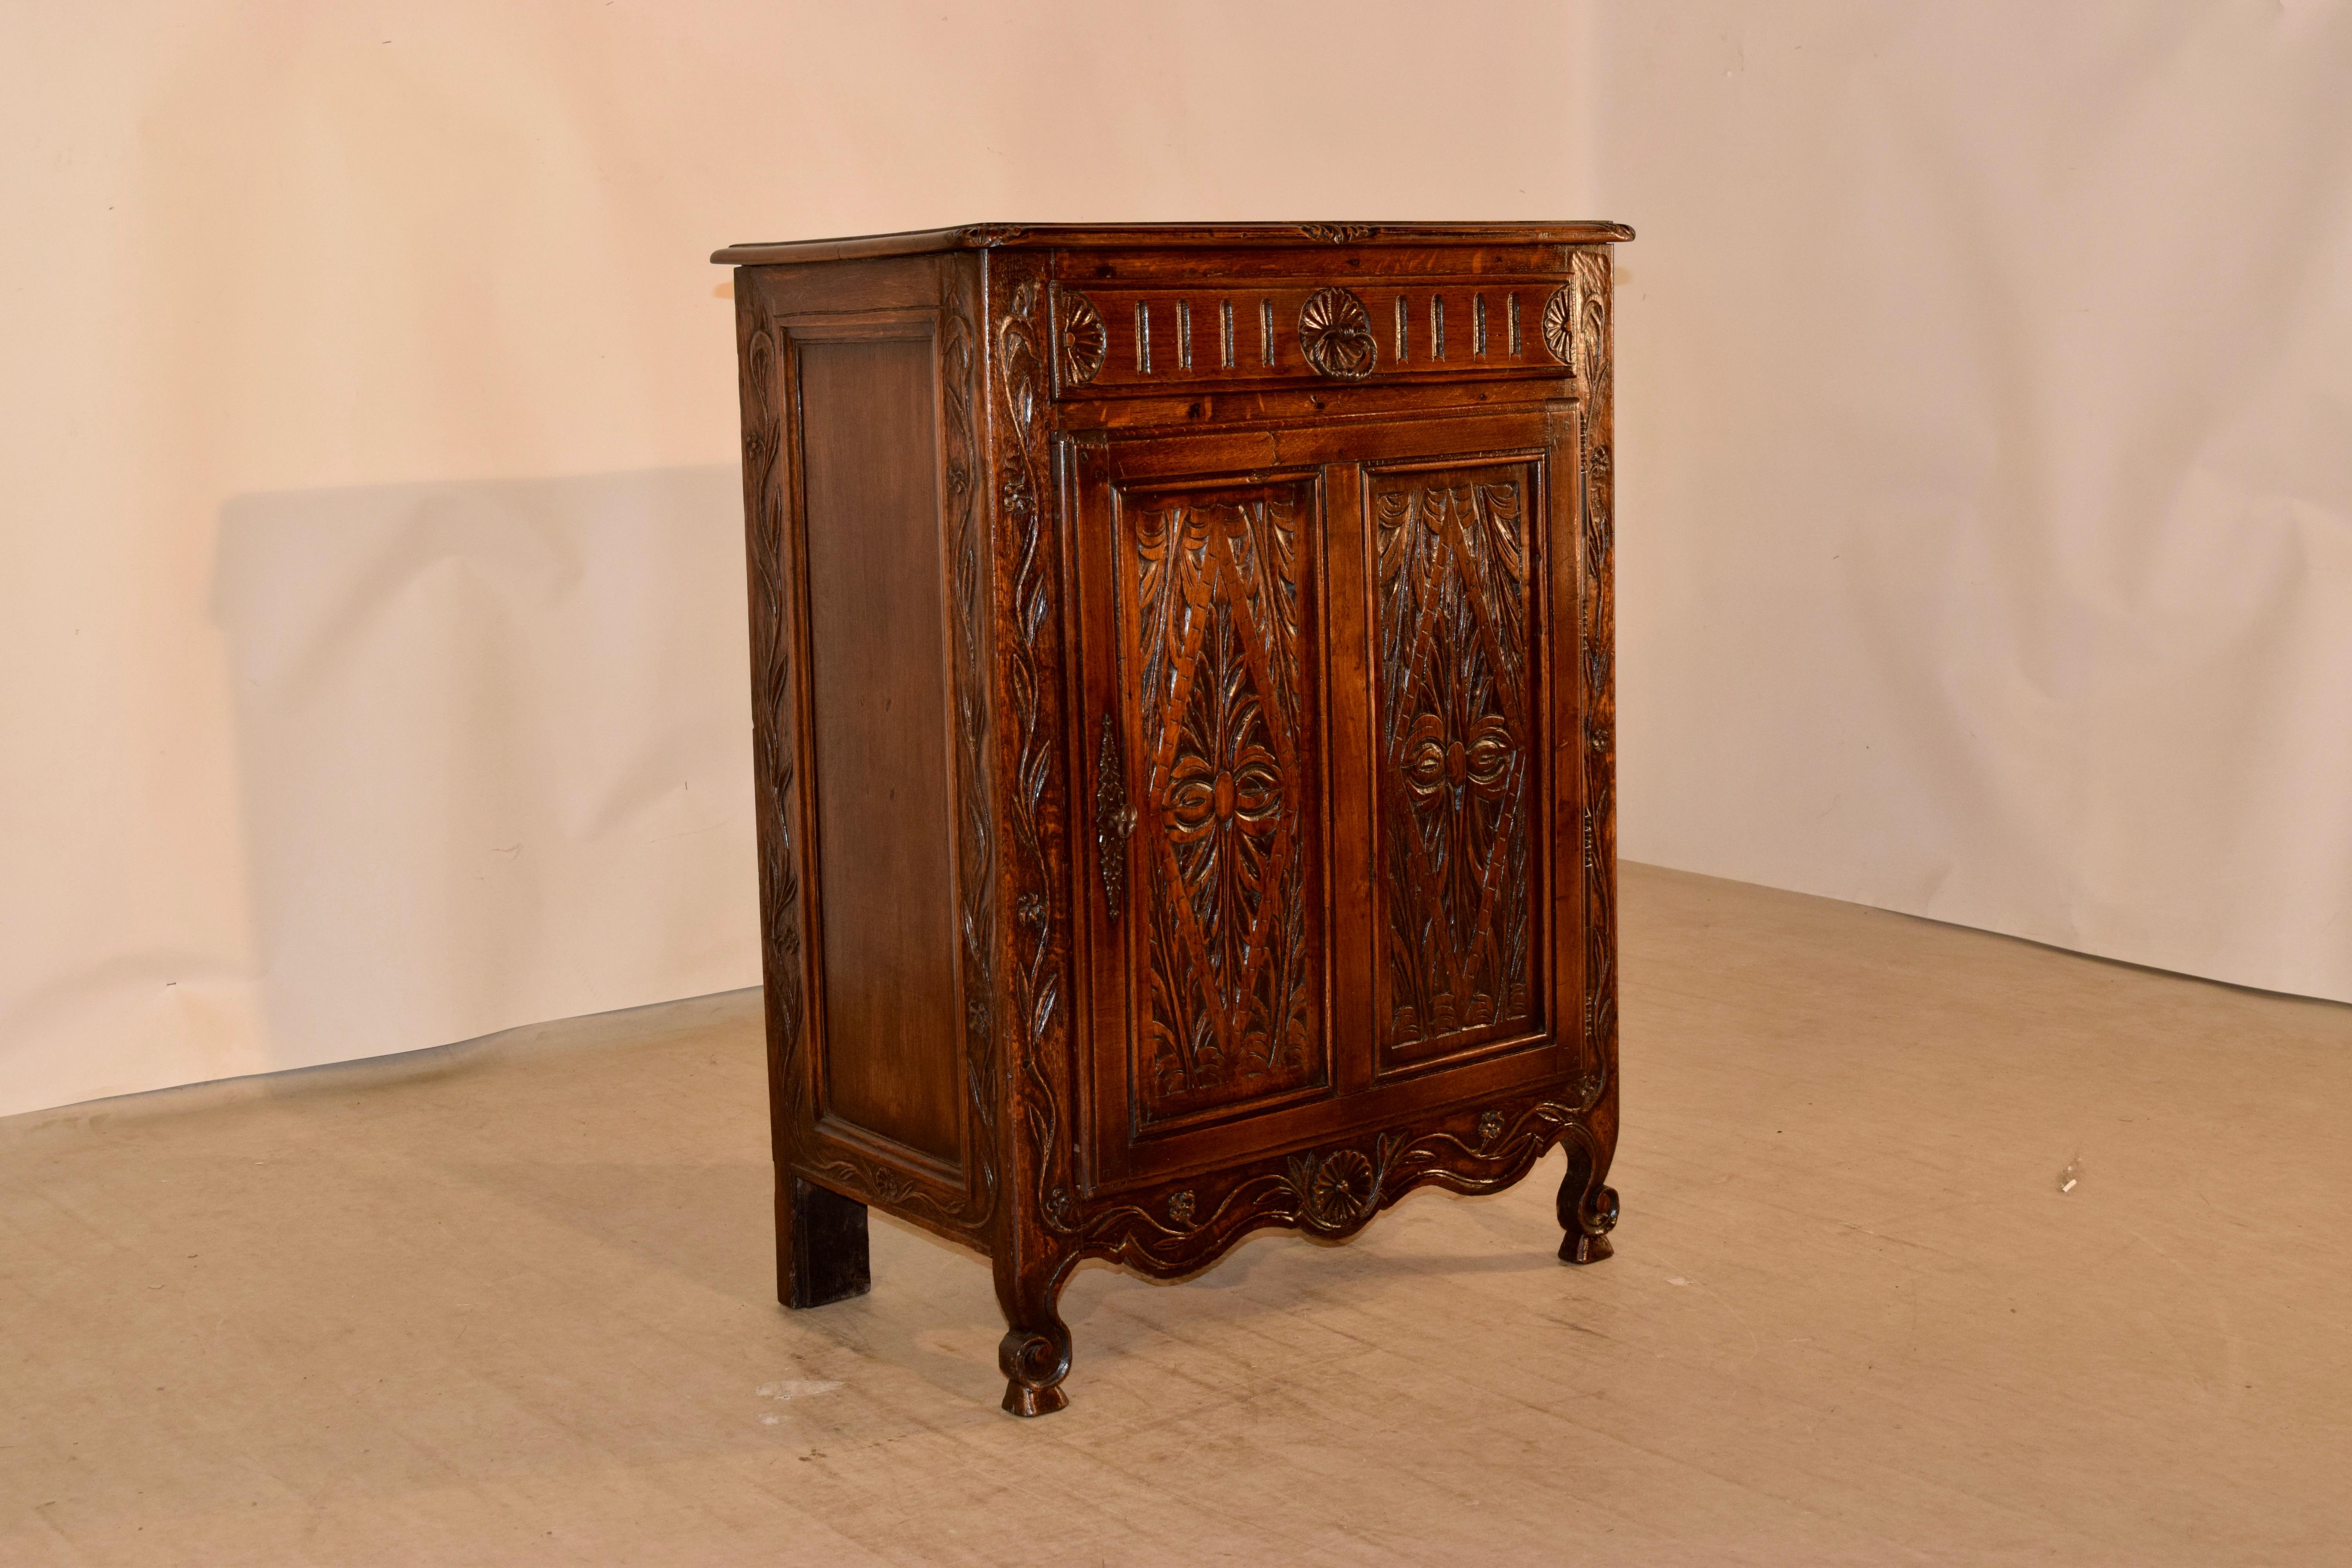 19th century oak buffet from France with a beveled edge around the top with nice hand carved details on the corners and front, following down to raised paneled sides which have carved borders. The front is spectacularly hand carved, and has a single